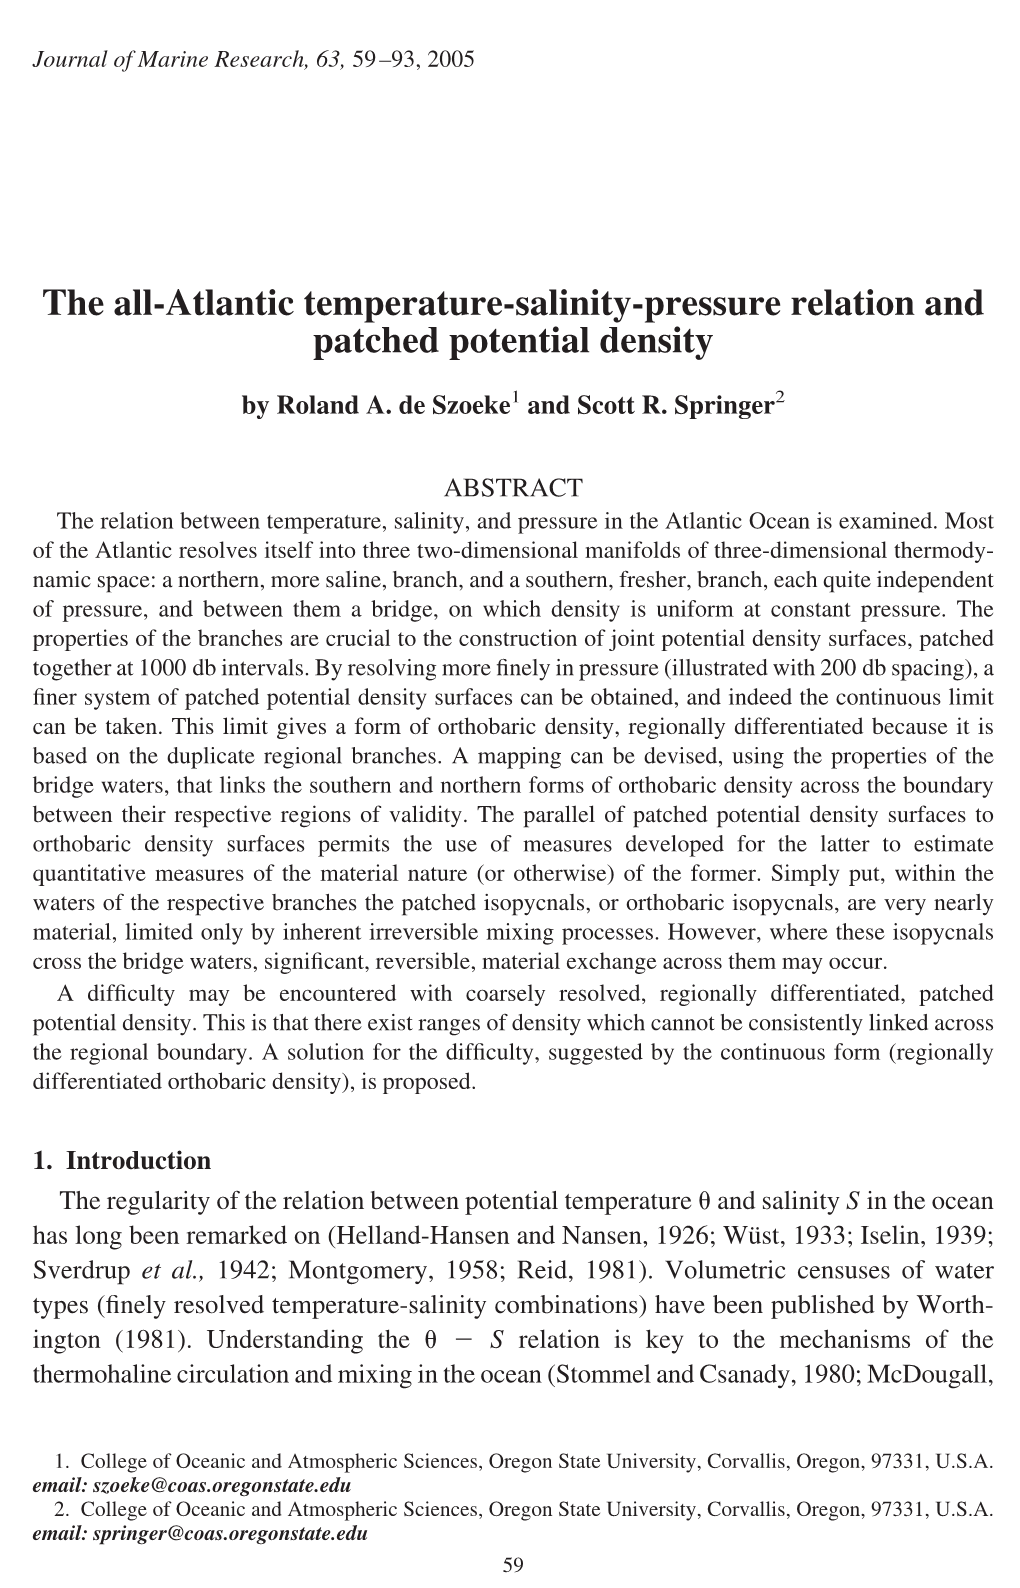 The All-Atlantic Temperature-Salinity-Pressure Relation and Patched Potential Density